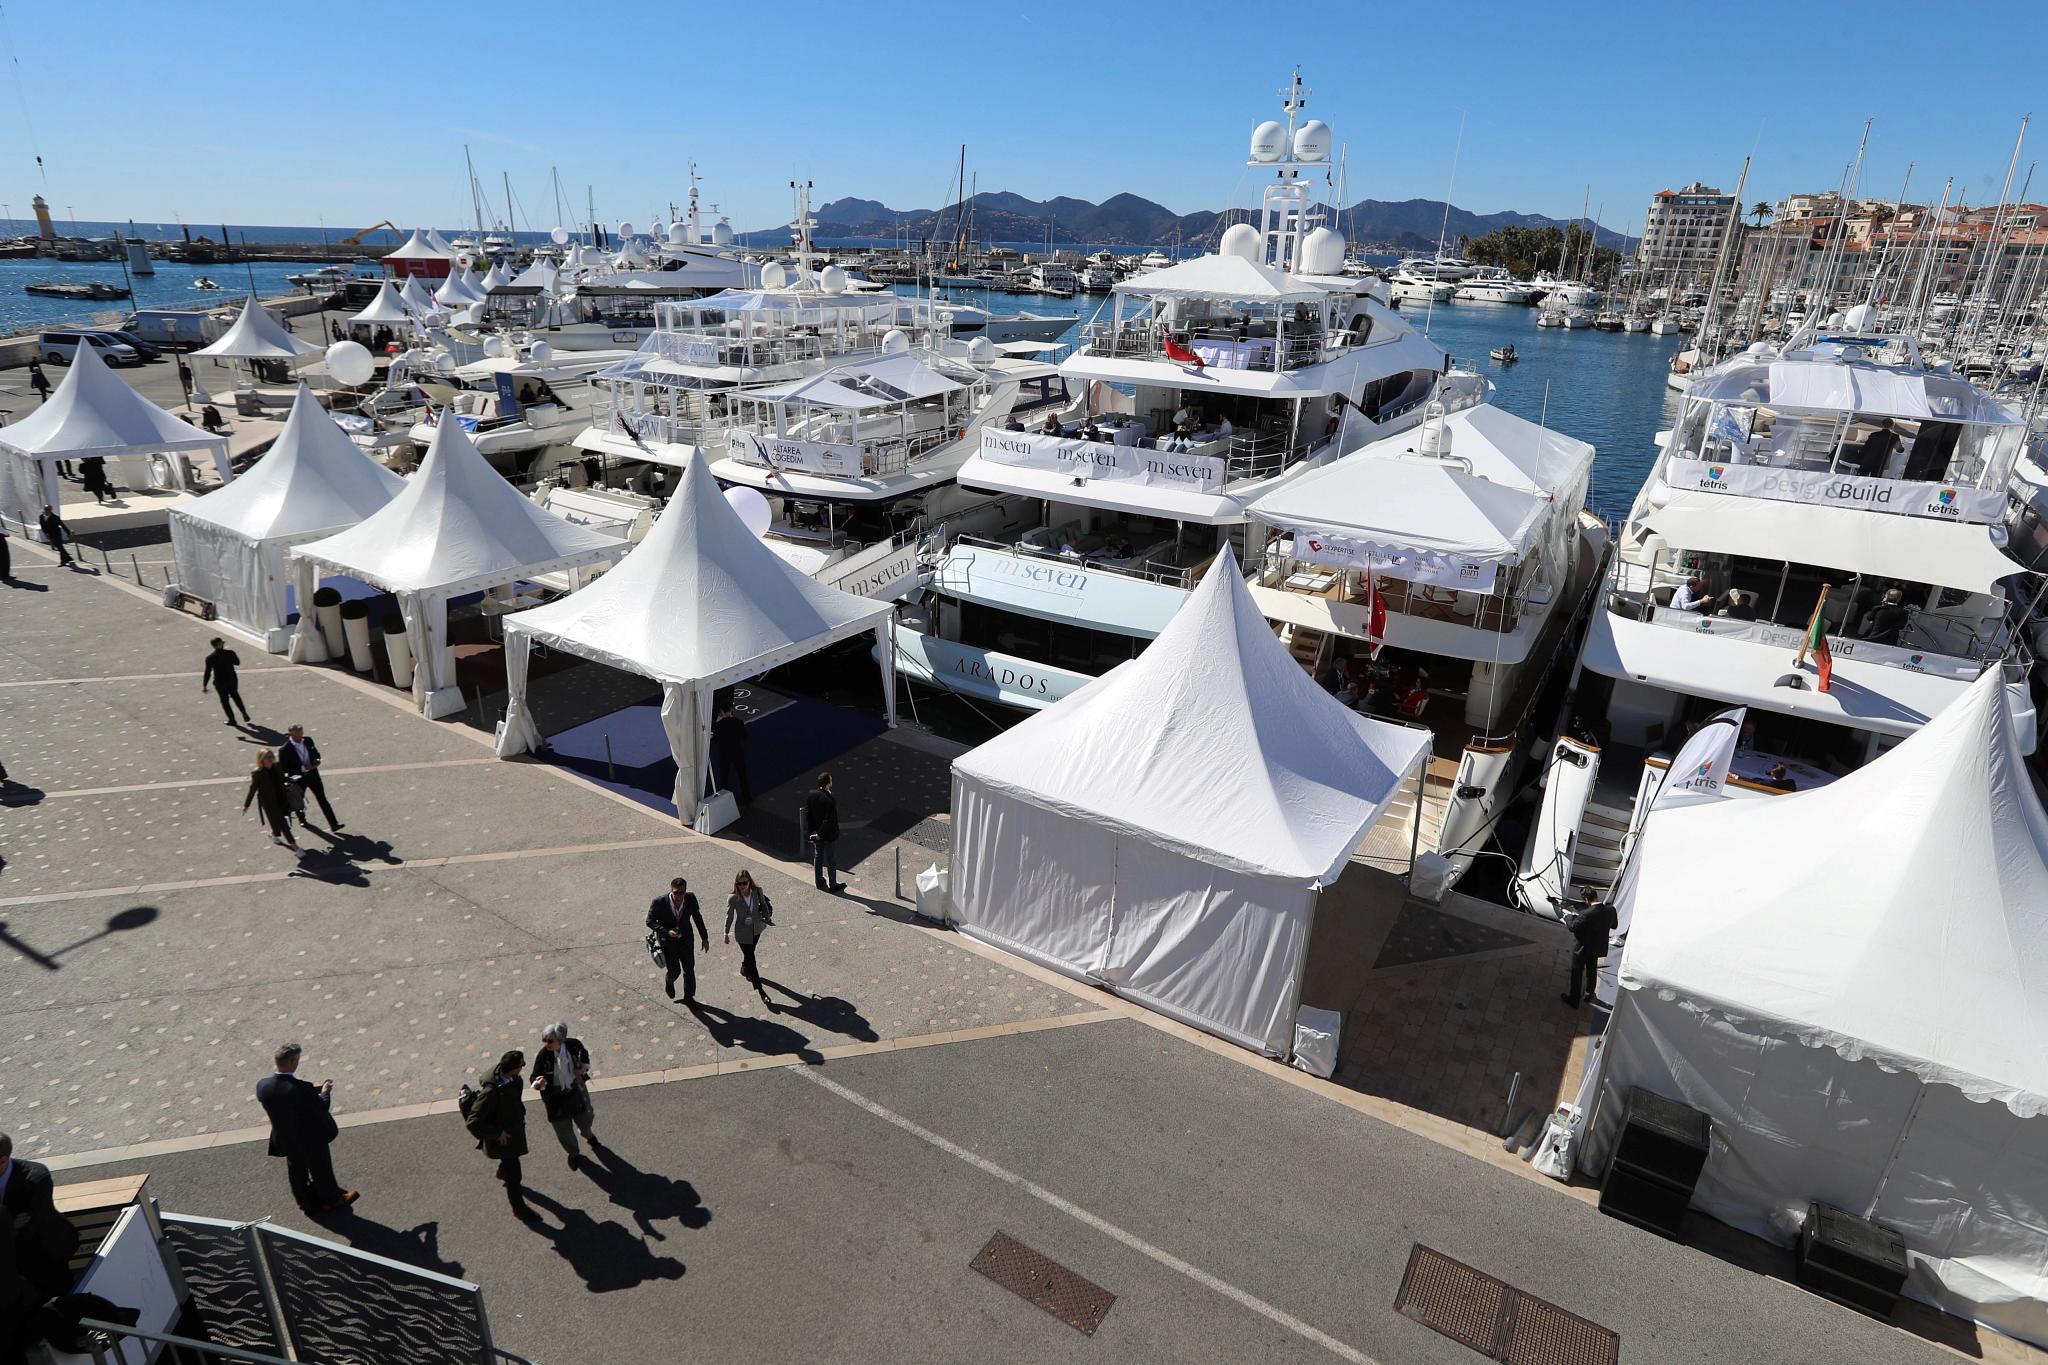 The annual Cannes event will have 23,000 delegates. (Photo by Valery Hache/AFP)